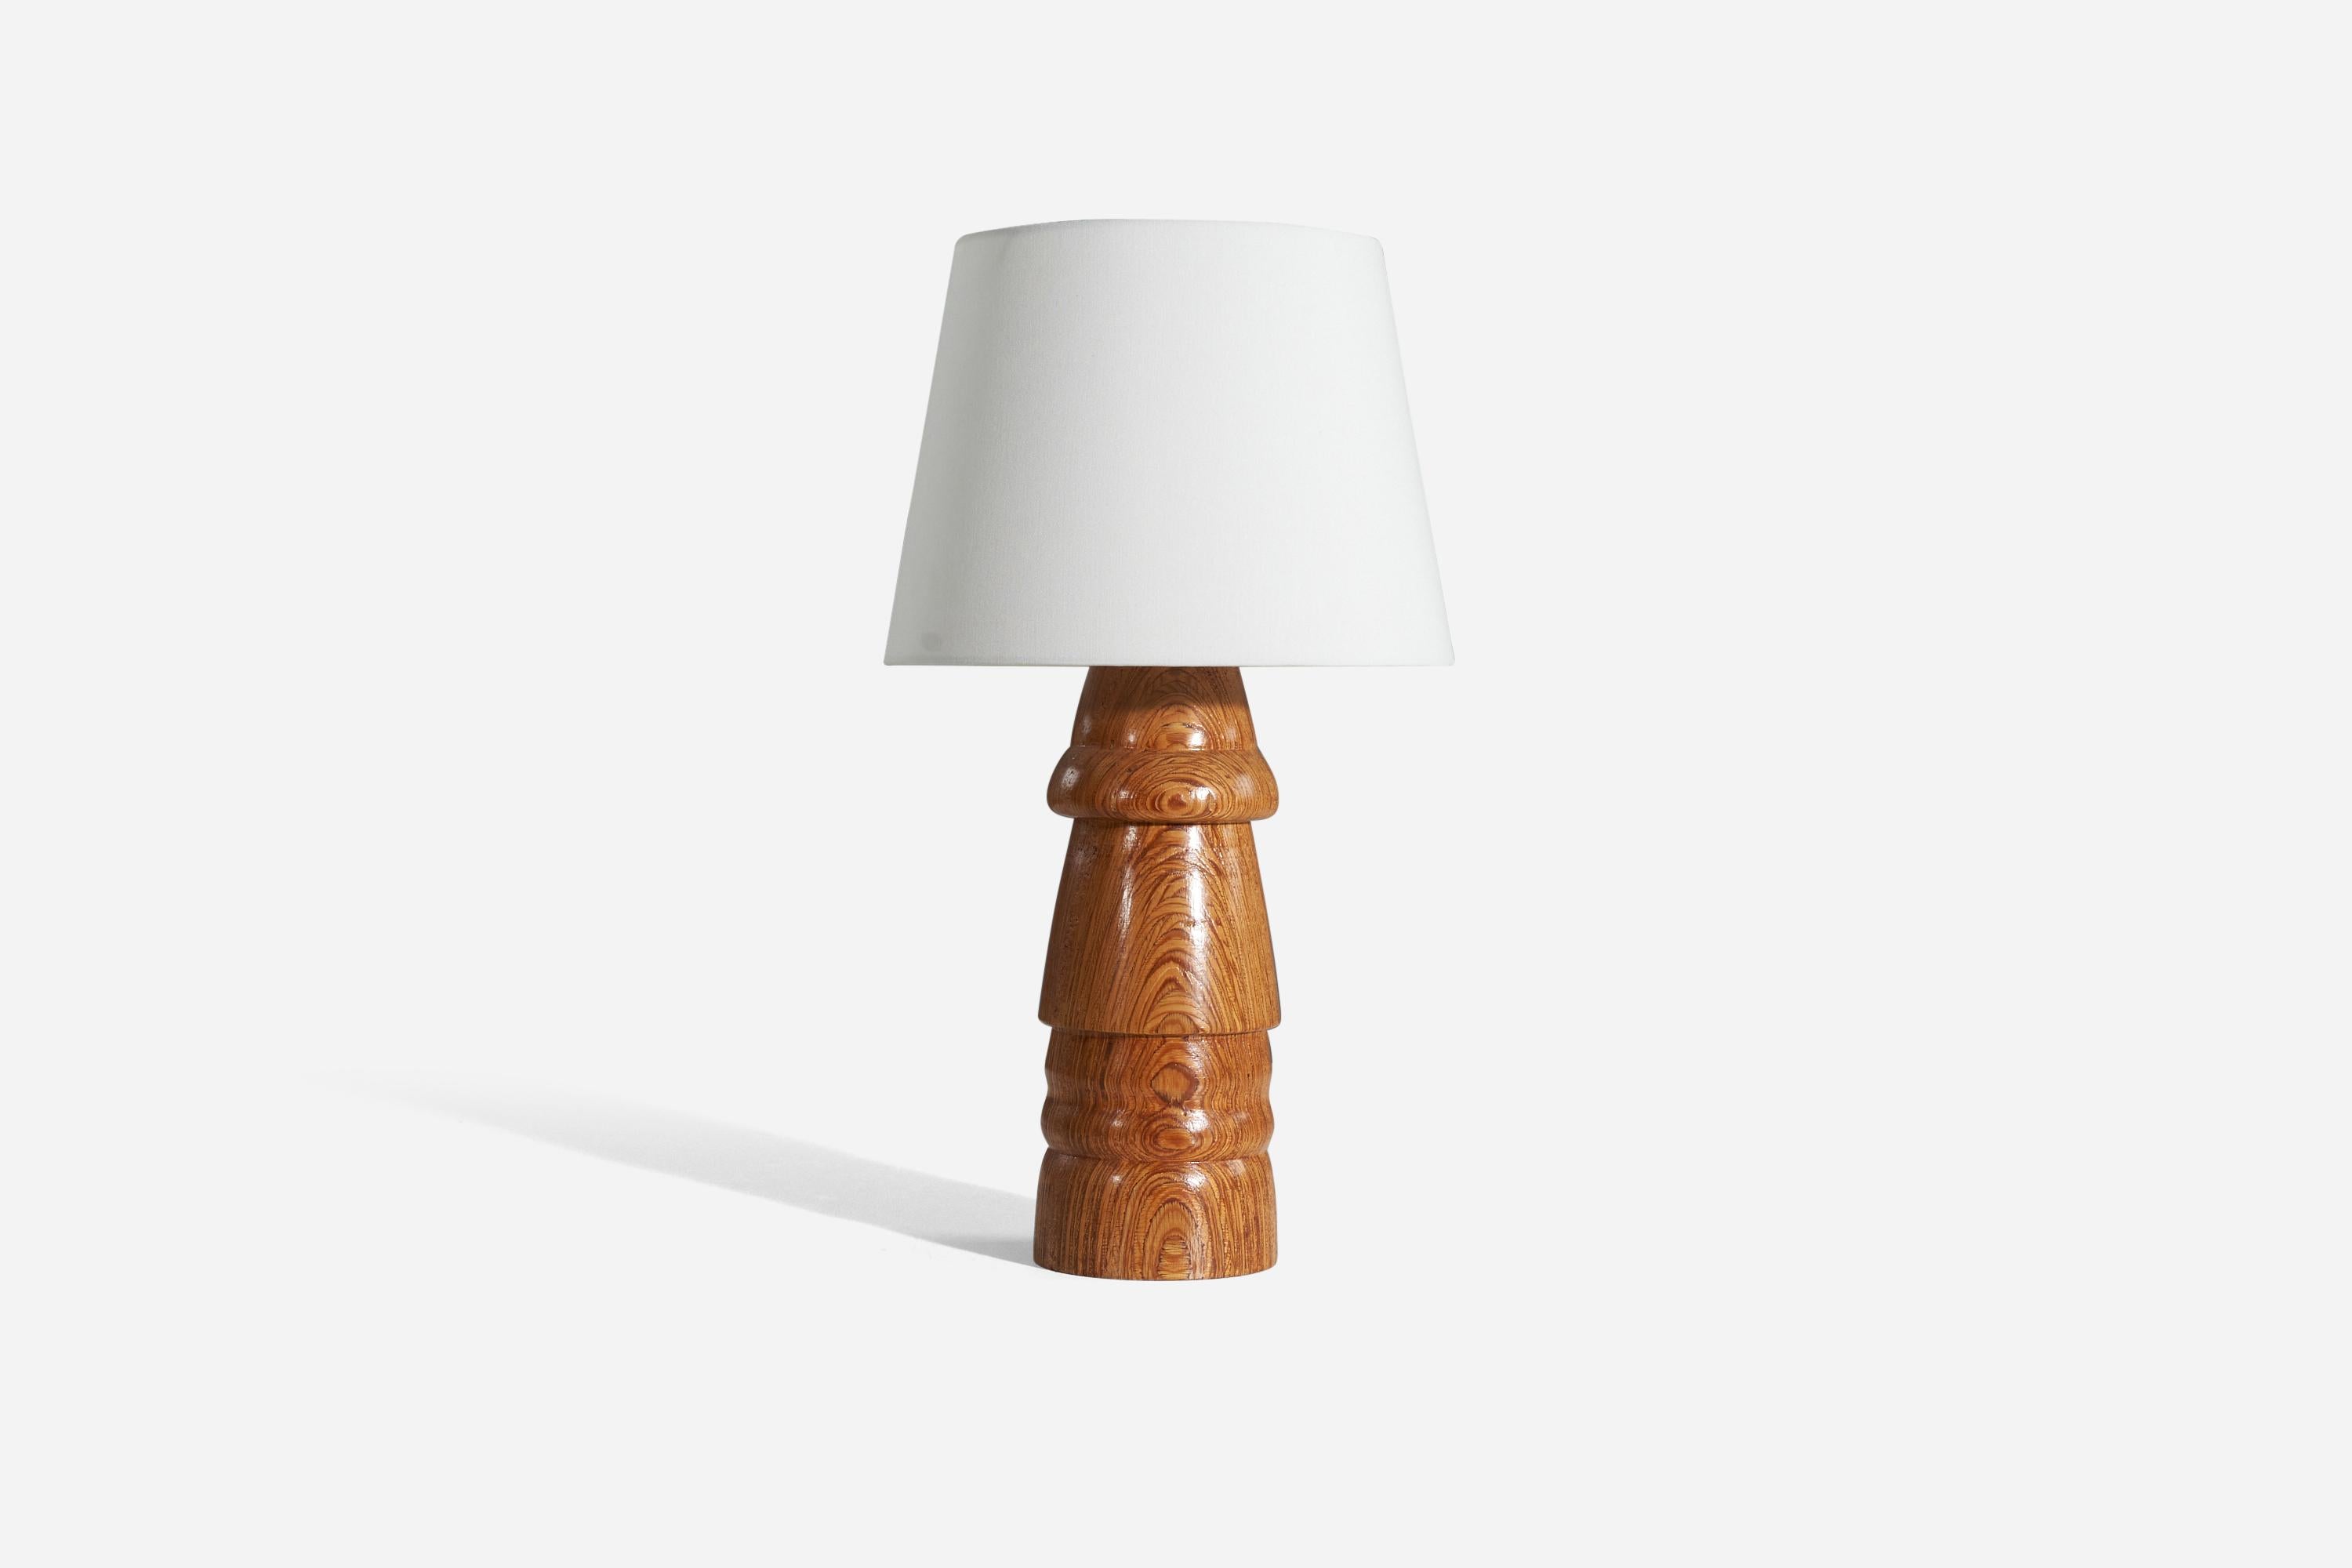 A stack laminated pine wood table lamp, designed and produced by a Swedish designer, Sweden, 1970s.

Sold without lampshade. 
Dimensions of Lamp (inches) : 17.5 x 5 x 5 (H x W x D)
Dimensions Shade (inches) : 9 x 12 x 9 (T x B x H)
Dimension of Lamp